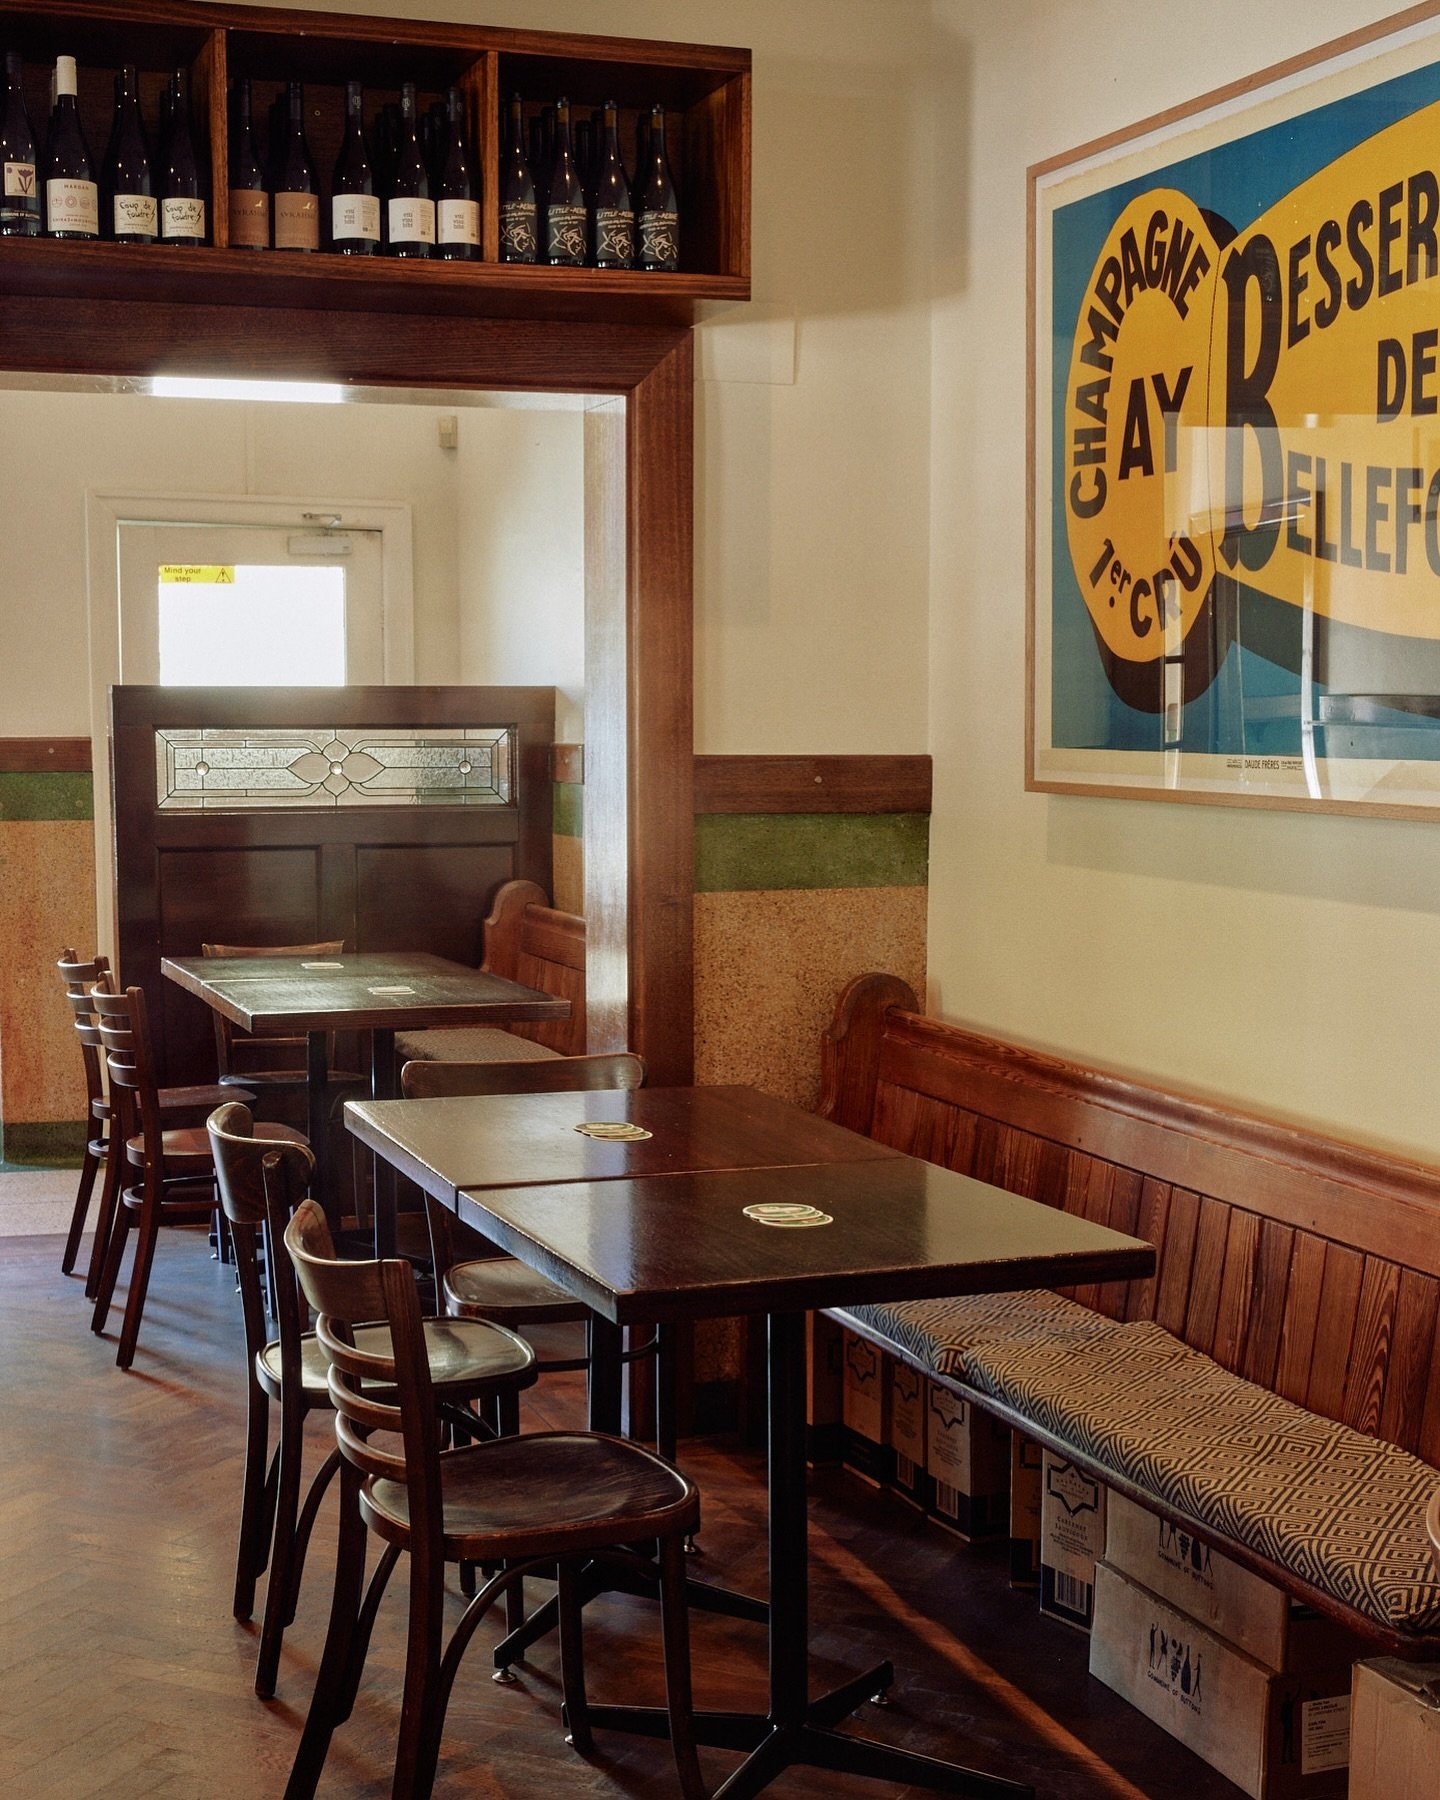 Easy times, relaxed vibes at the pub.

Drop in for the famous schnitzel, or maybe a $25 winter warmer, or the Sunday roast (beef this week).

Have a chat or banter with our team and order something delicious - beer, wine, cocktail or a not so boozy b